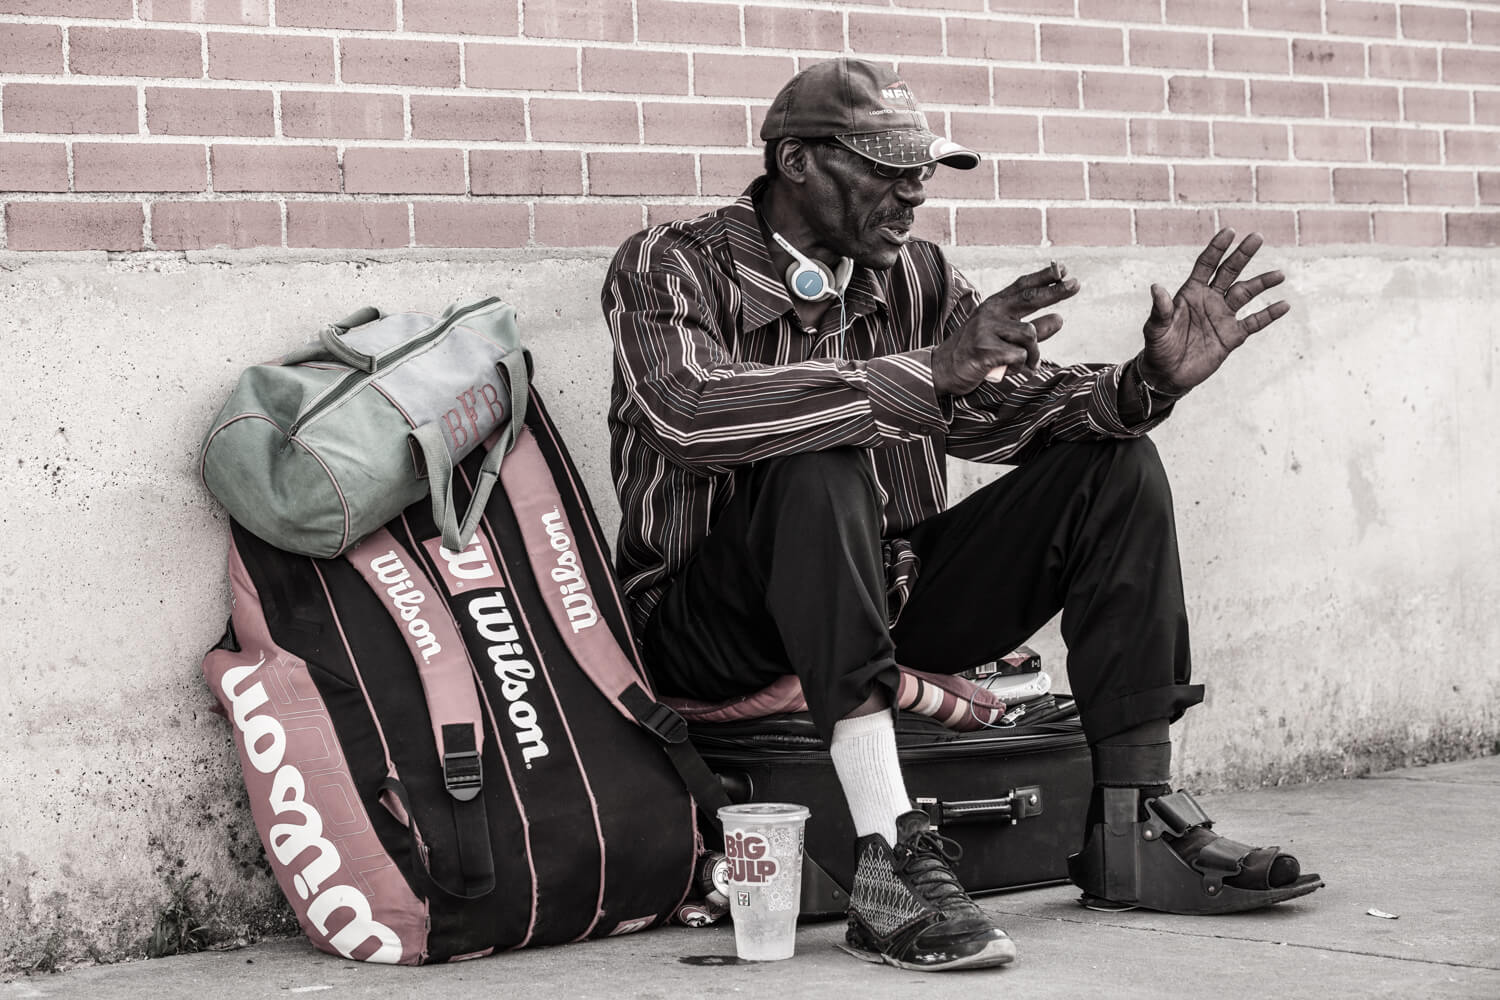 Only Temporary - Homeless in Dallas: Older man tells his story